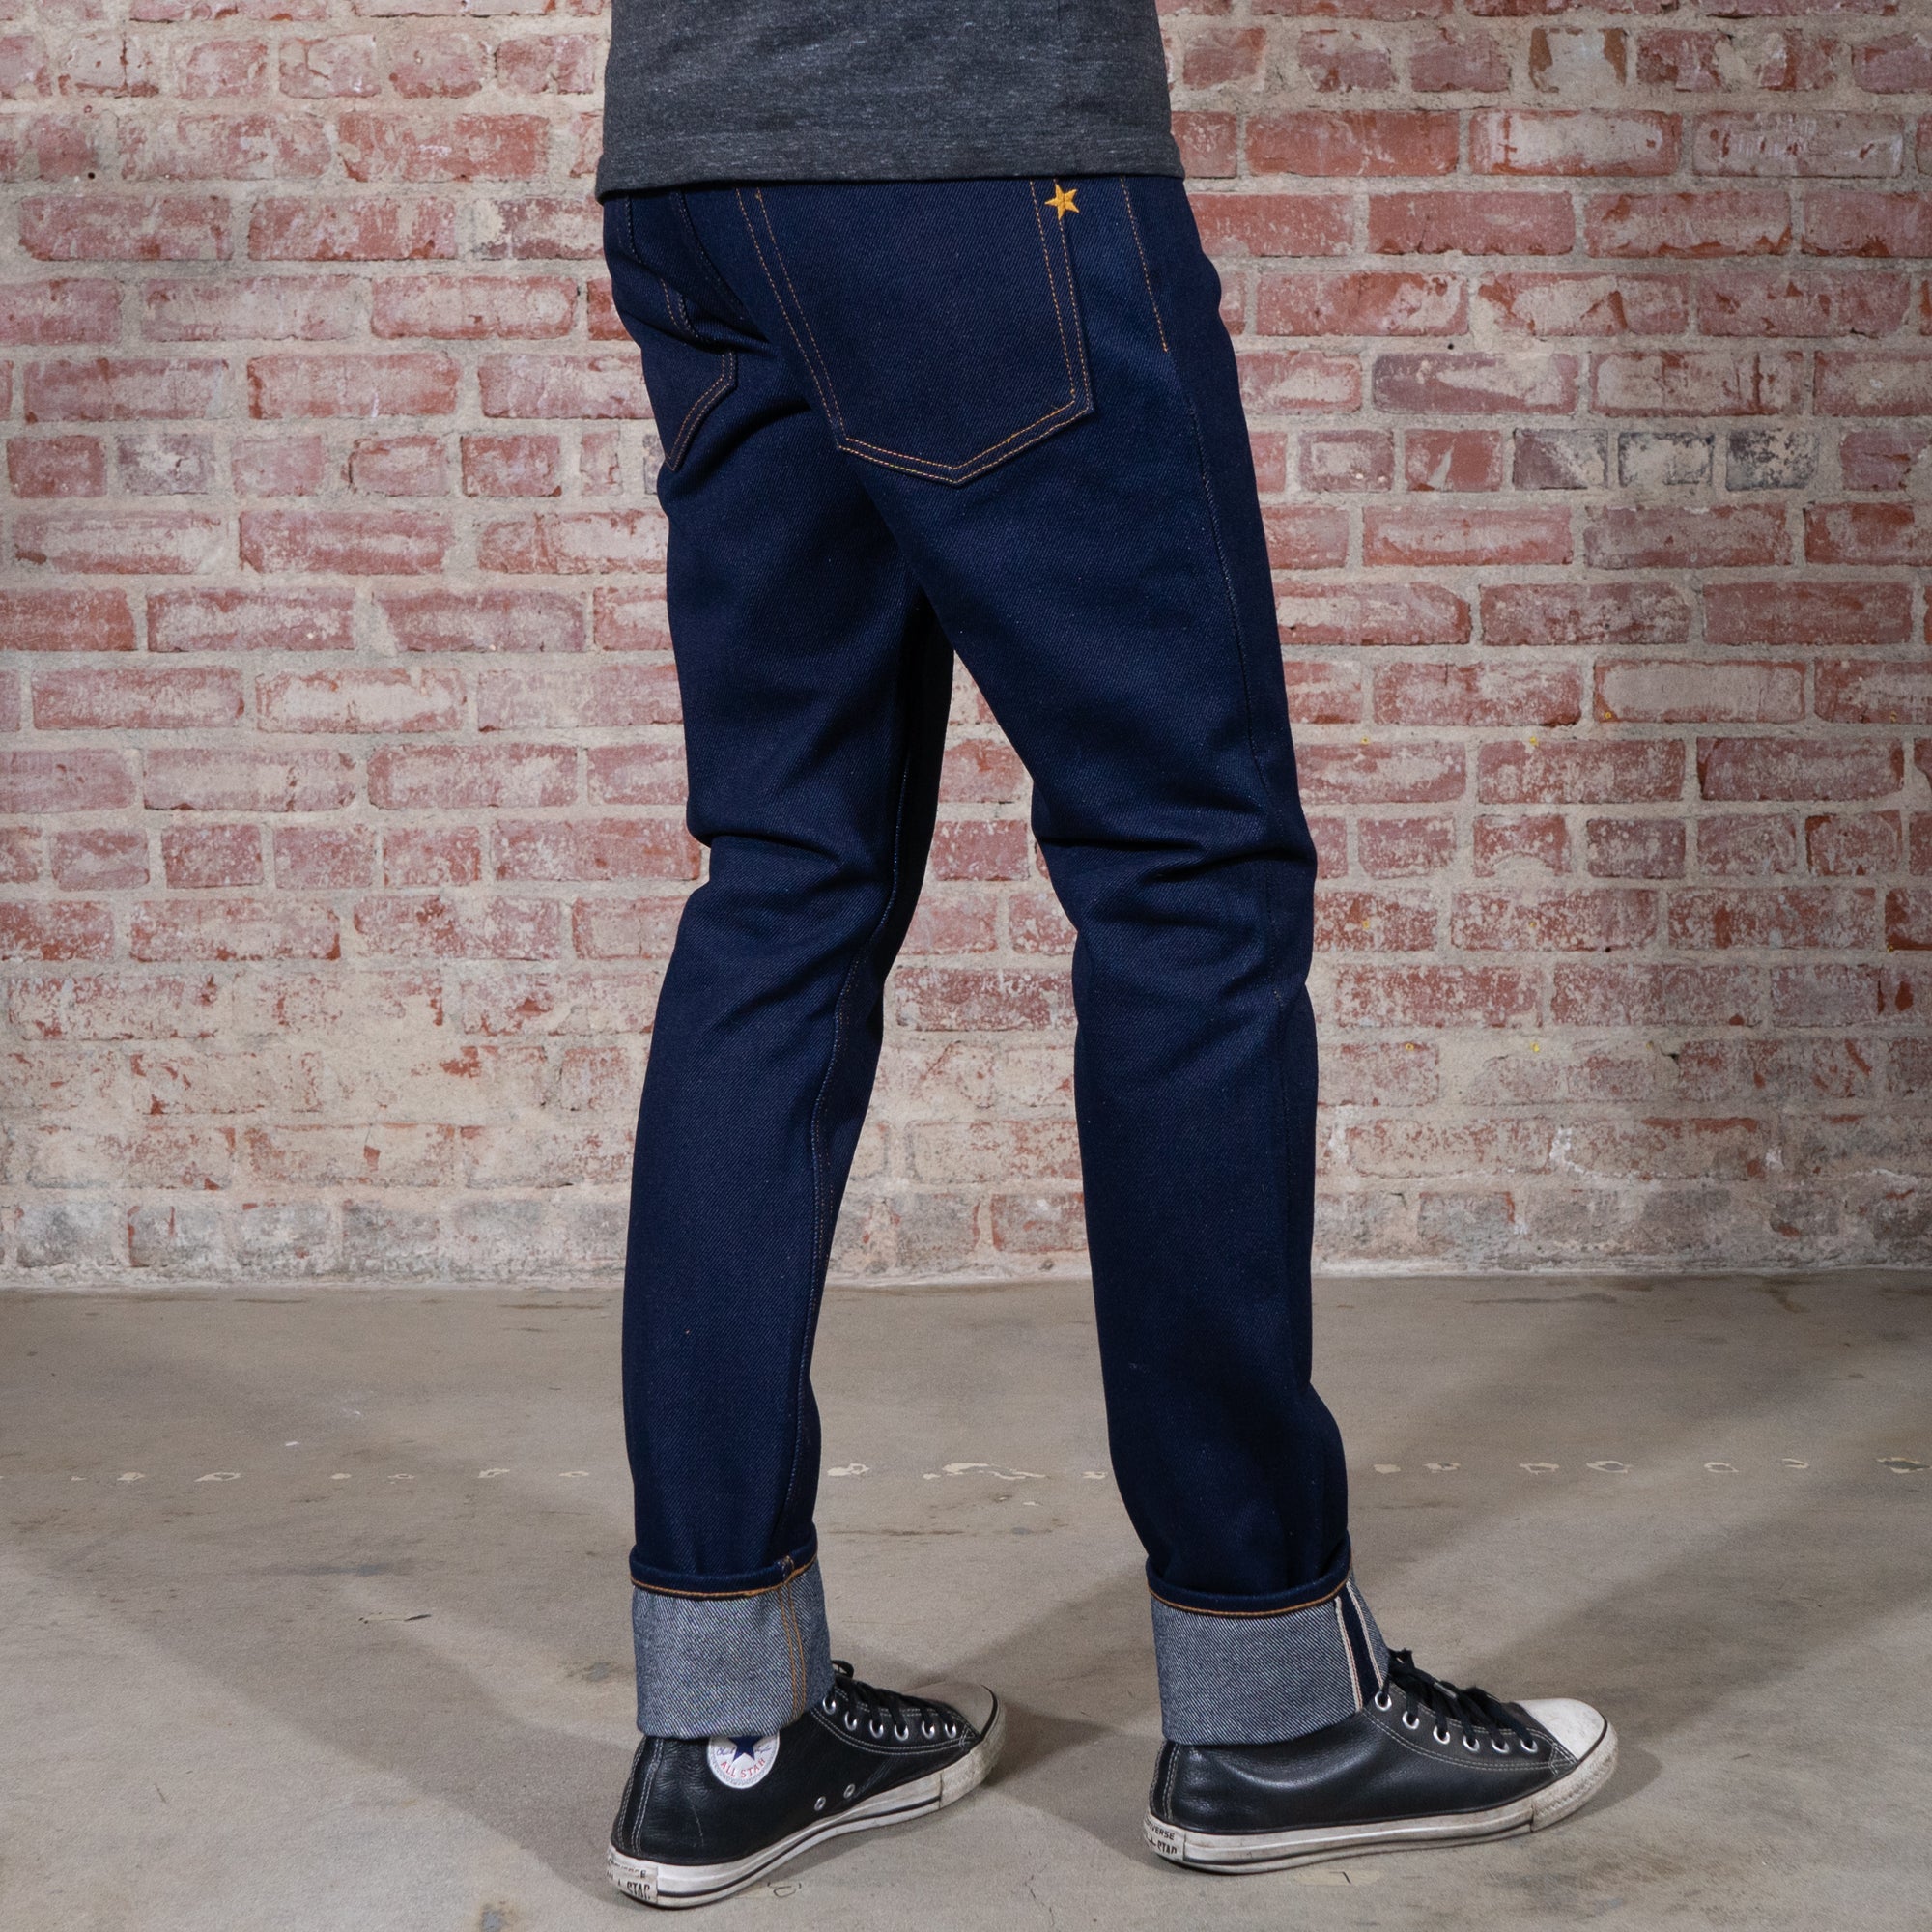 A 3-Year Denizen Jeans Review | Good Value, or Just Cheap? | Stridewise